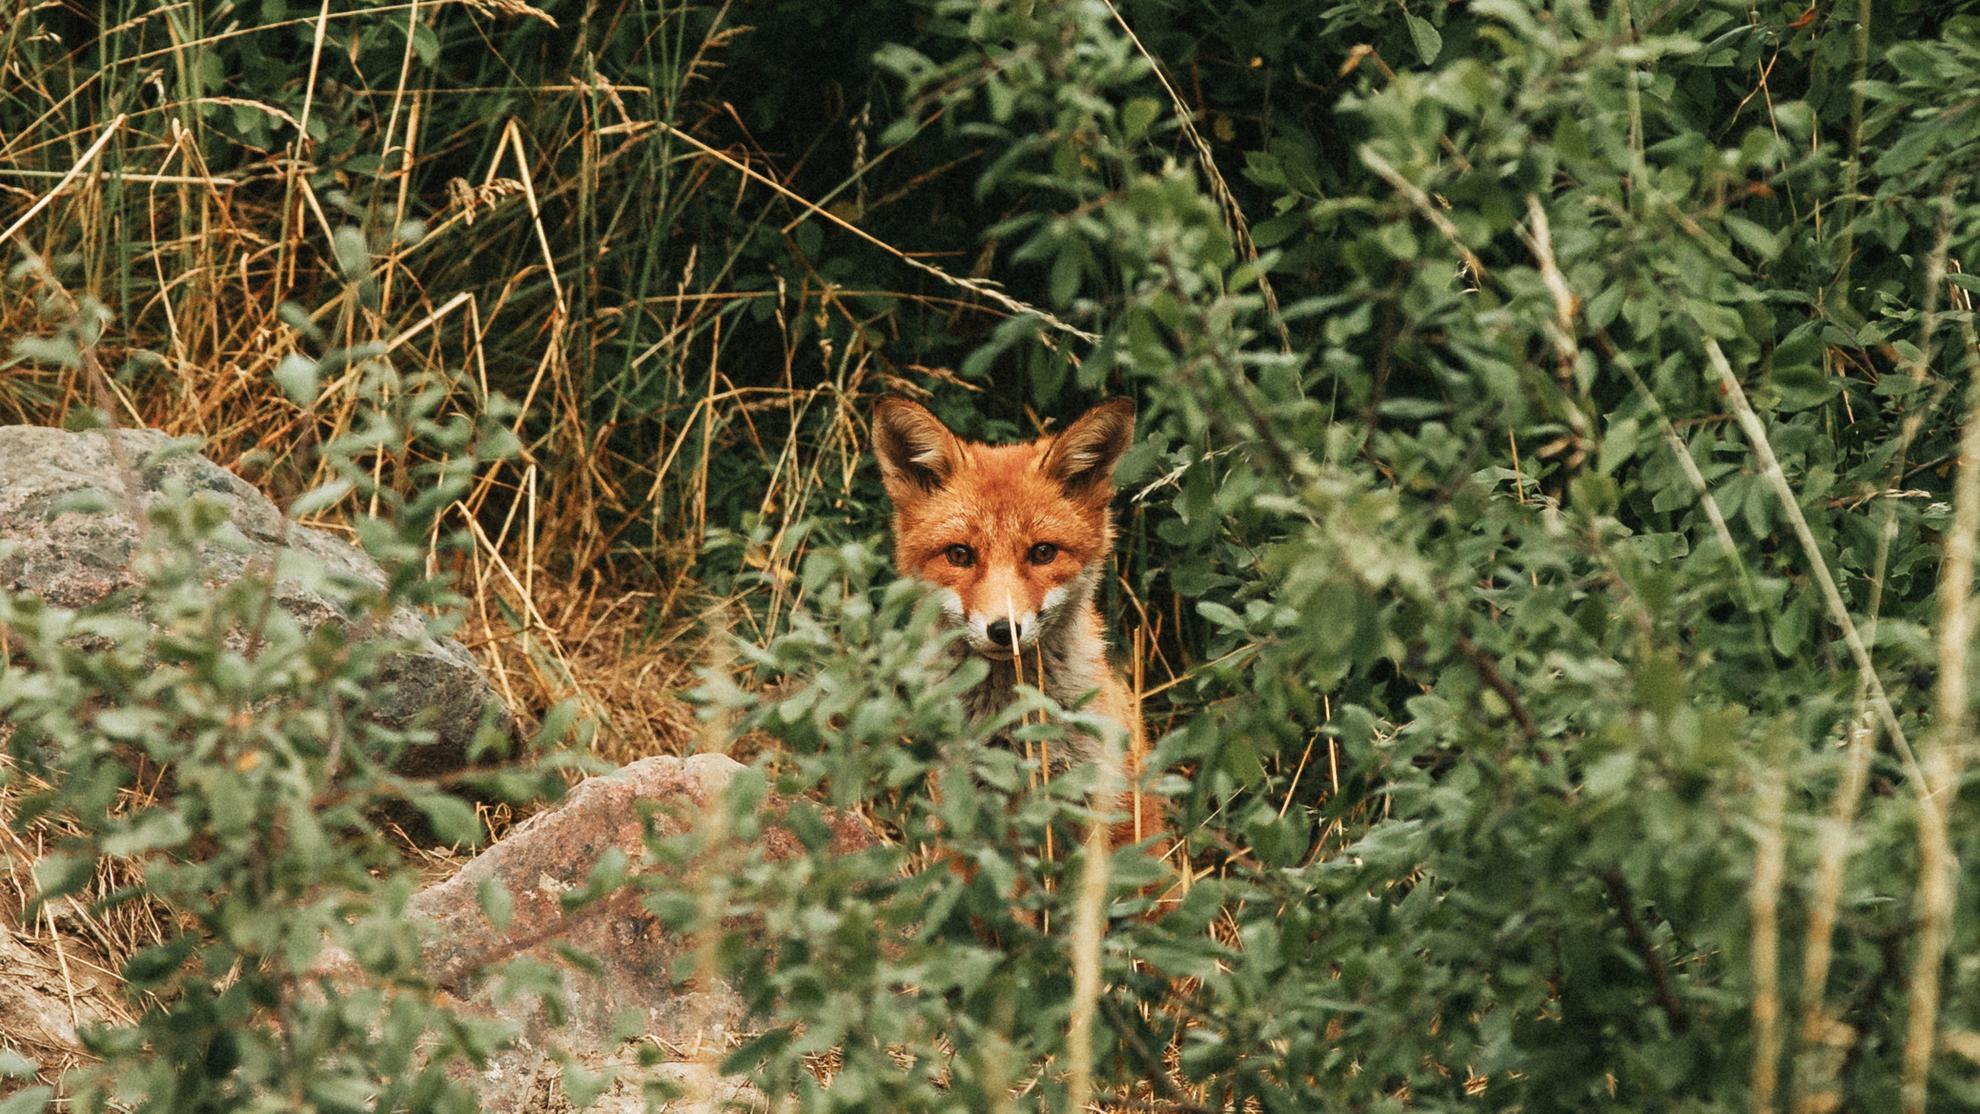 A fox in the wild behind bushes.